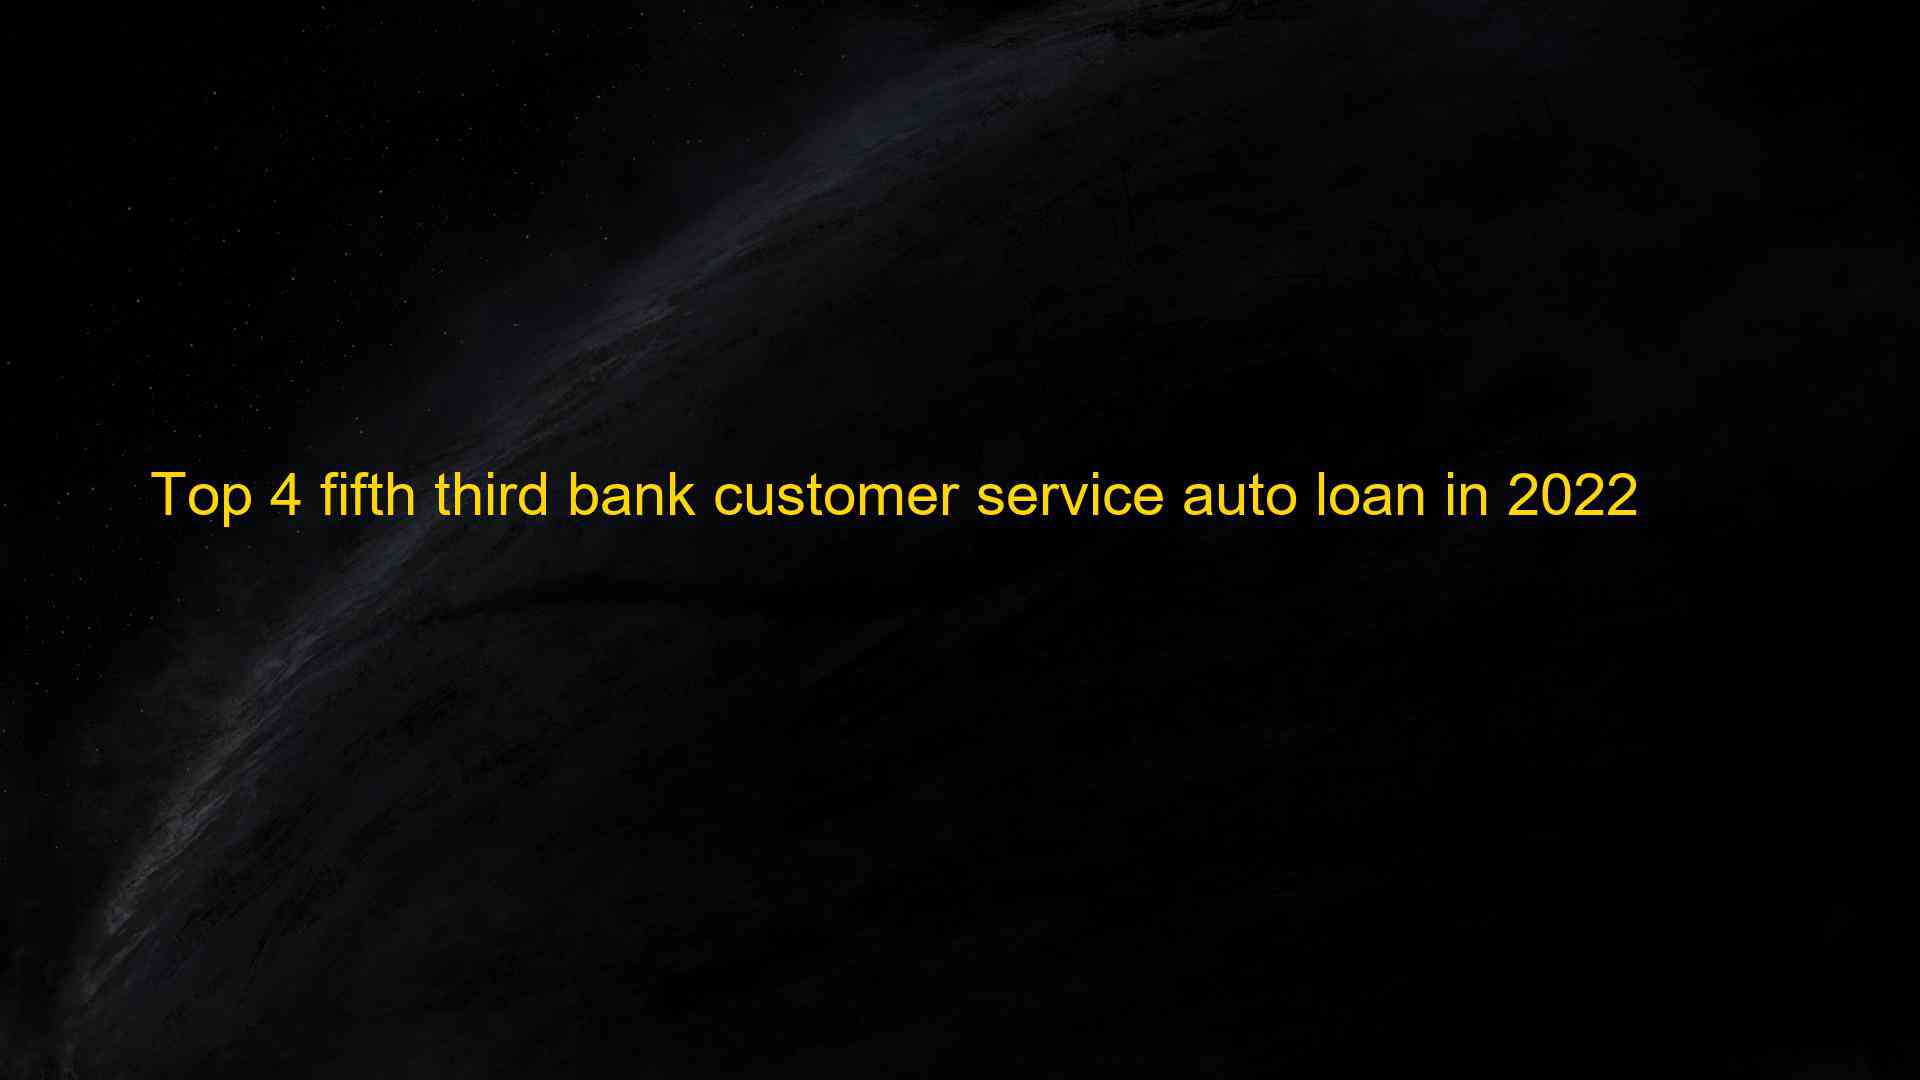 Top 4 fifth third bank customer service auto loan in 2022 1659598880